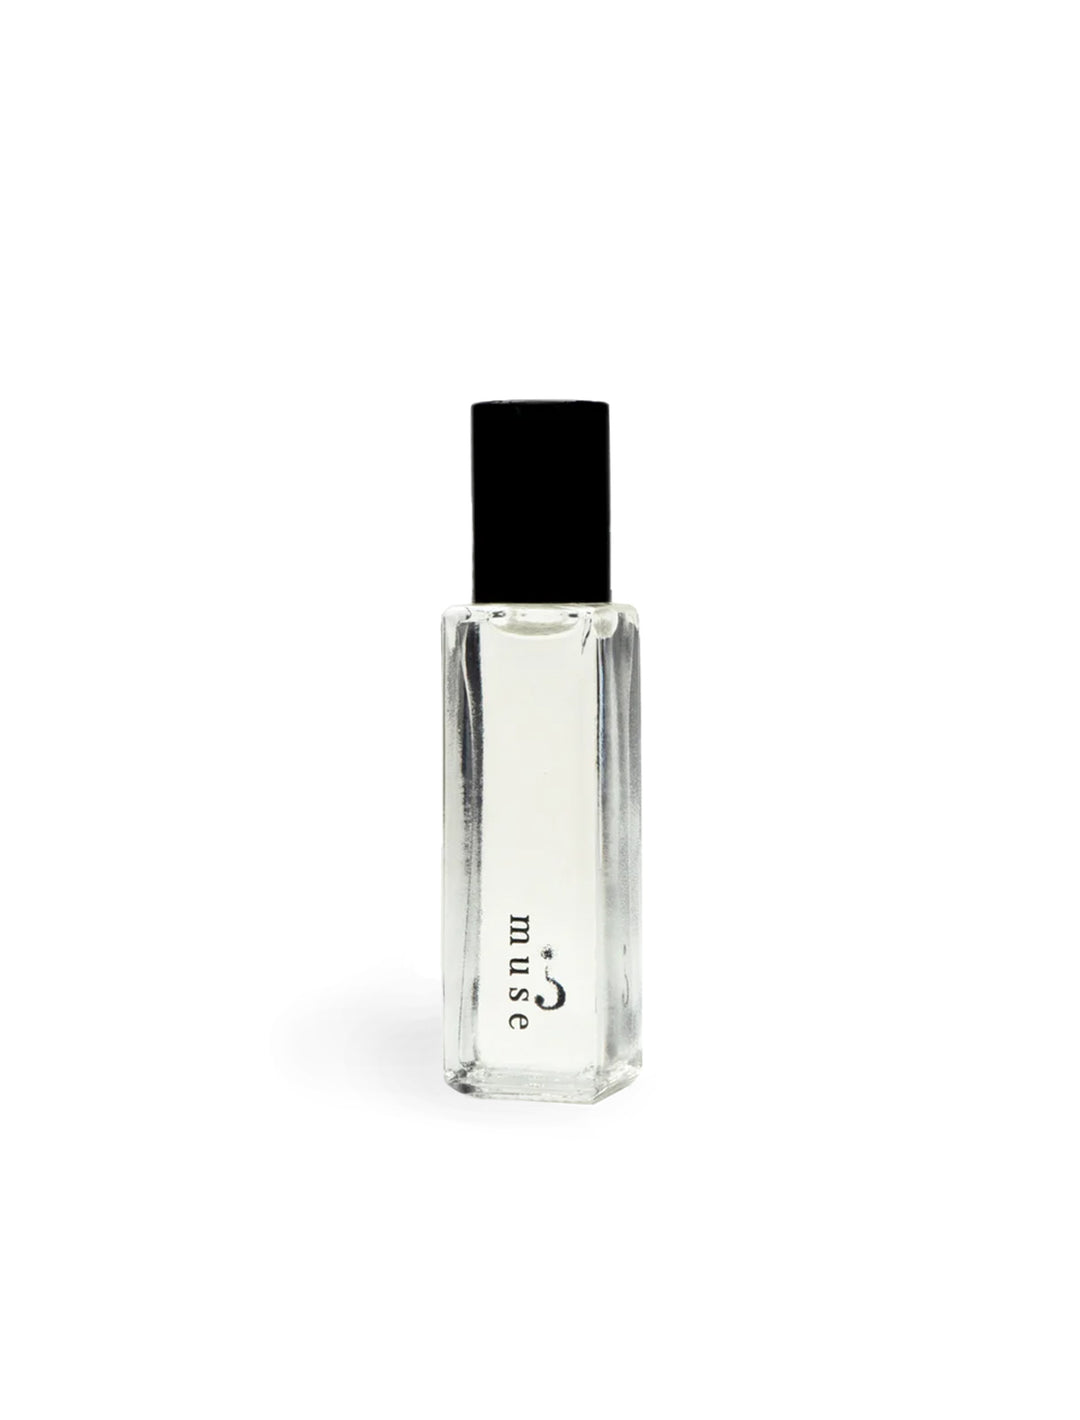 Riddle Oil's muse roll-on oil 8ml.